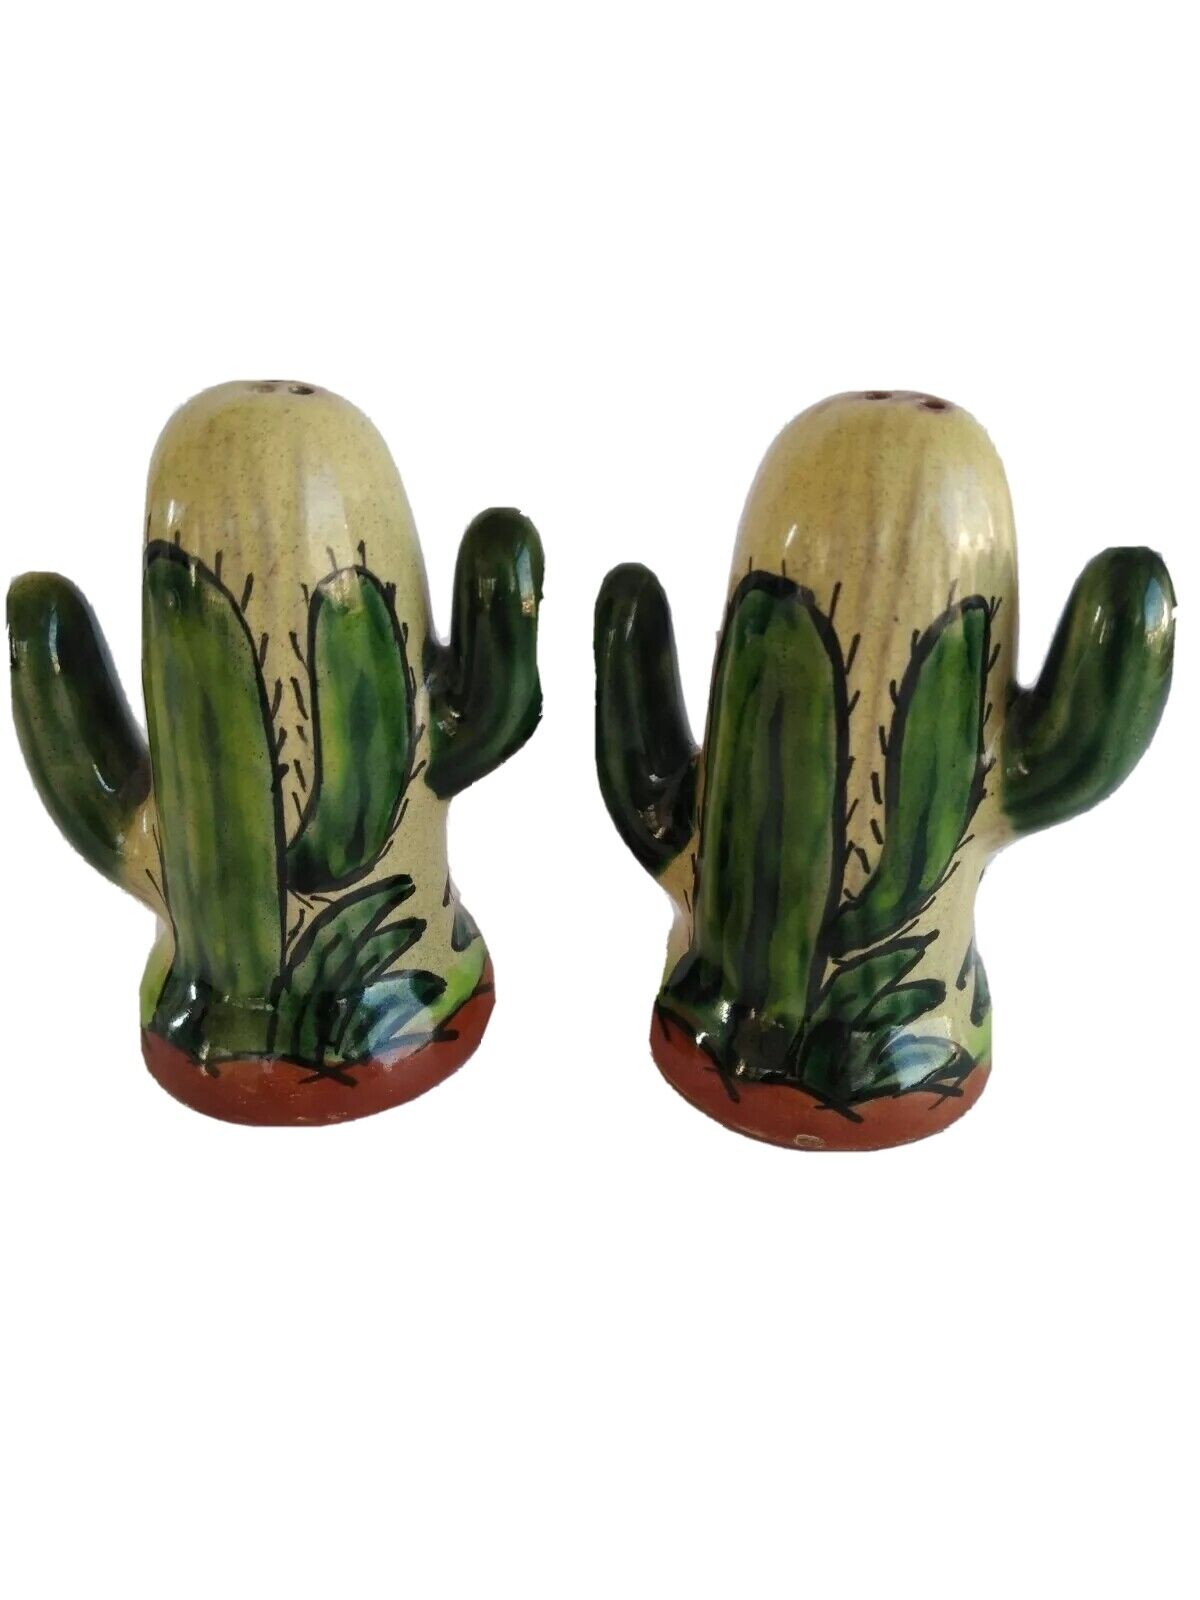 CATUS CLAY POTTERY SALT & PEPPER SHAKERS  MEXICO 4\